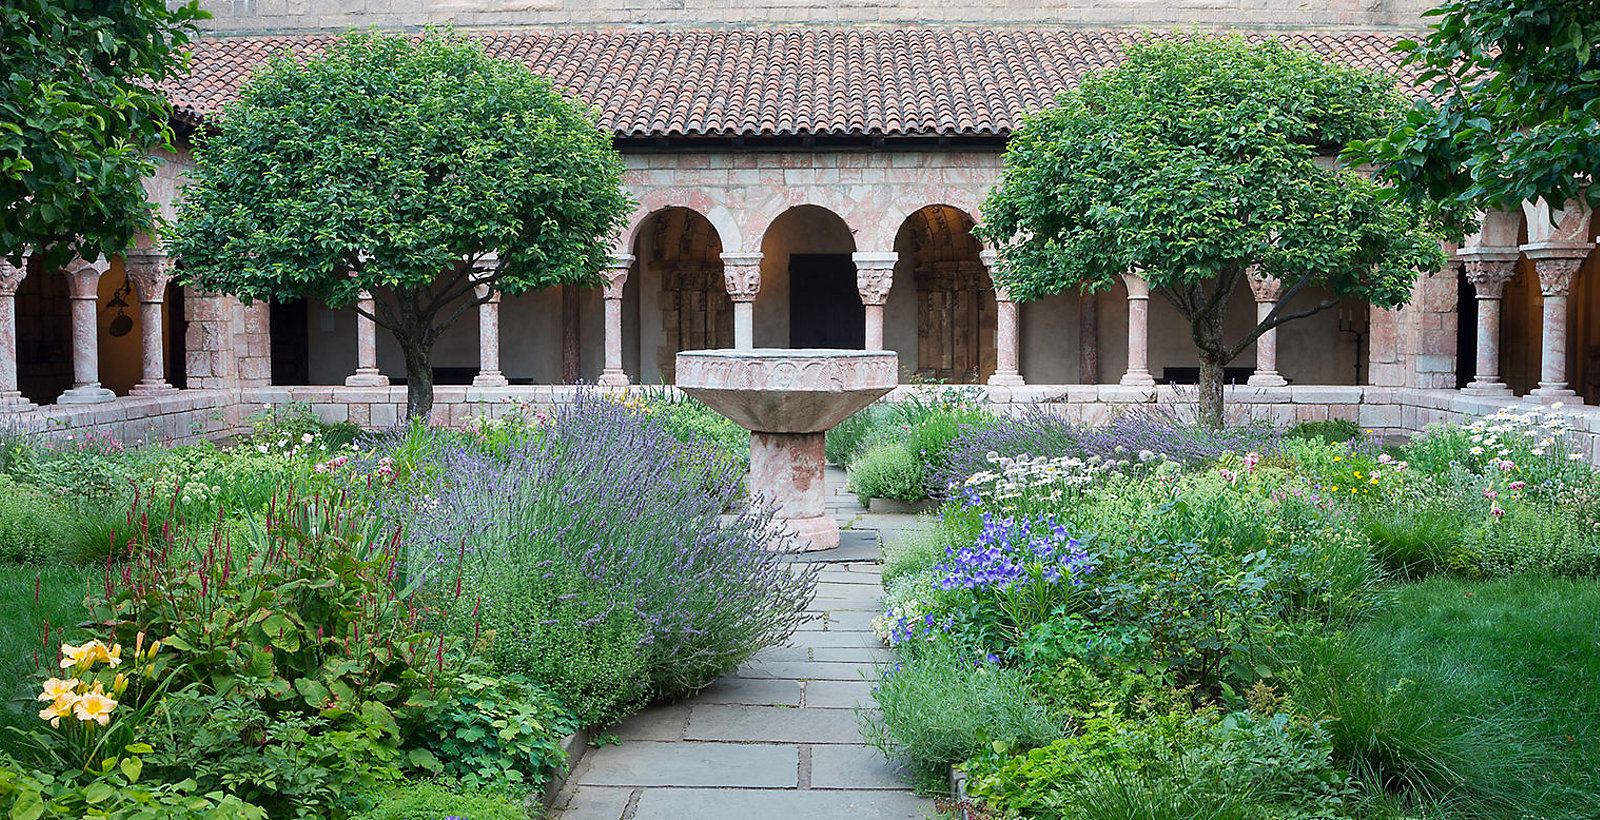 Medieval Art and The Cloisters